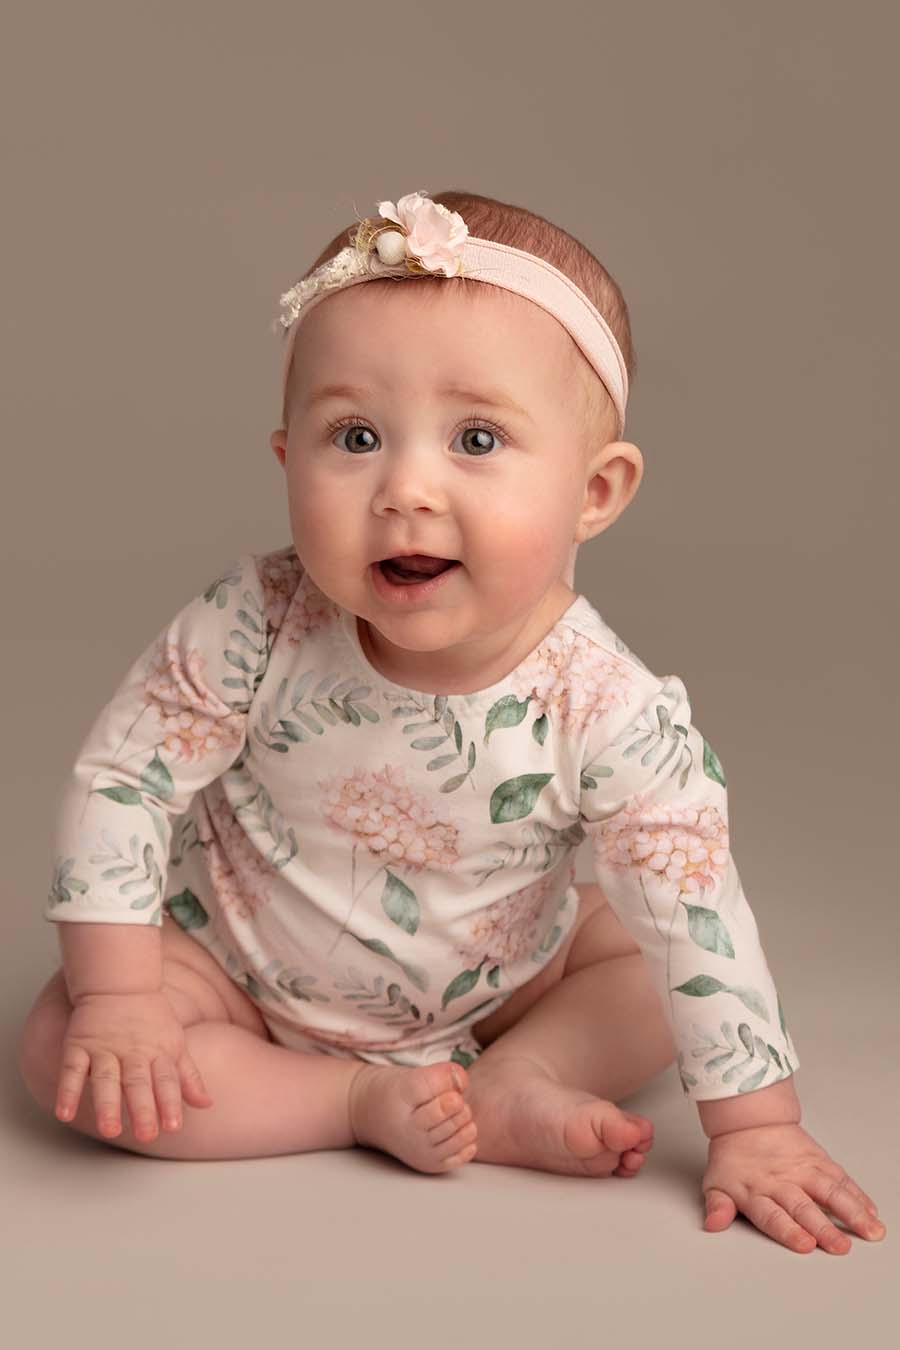 baby poses wearing a romper with long sleeves and flower pattern. she has a matching hairband.